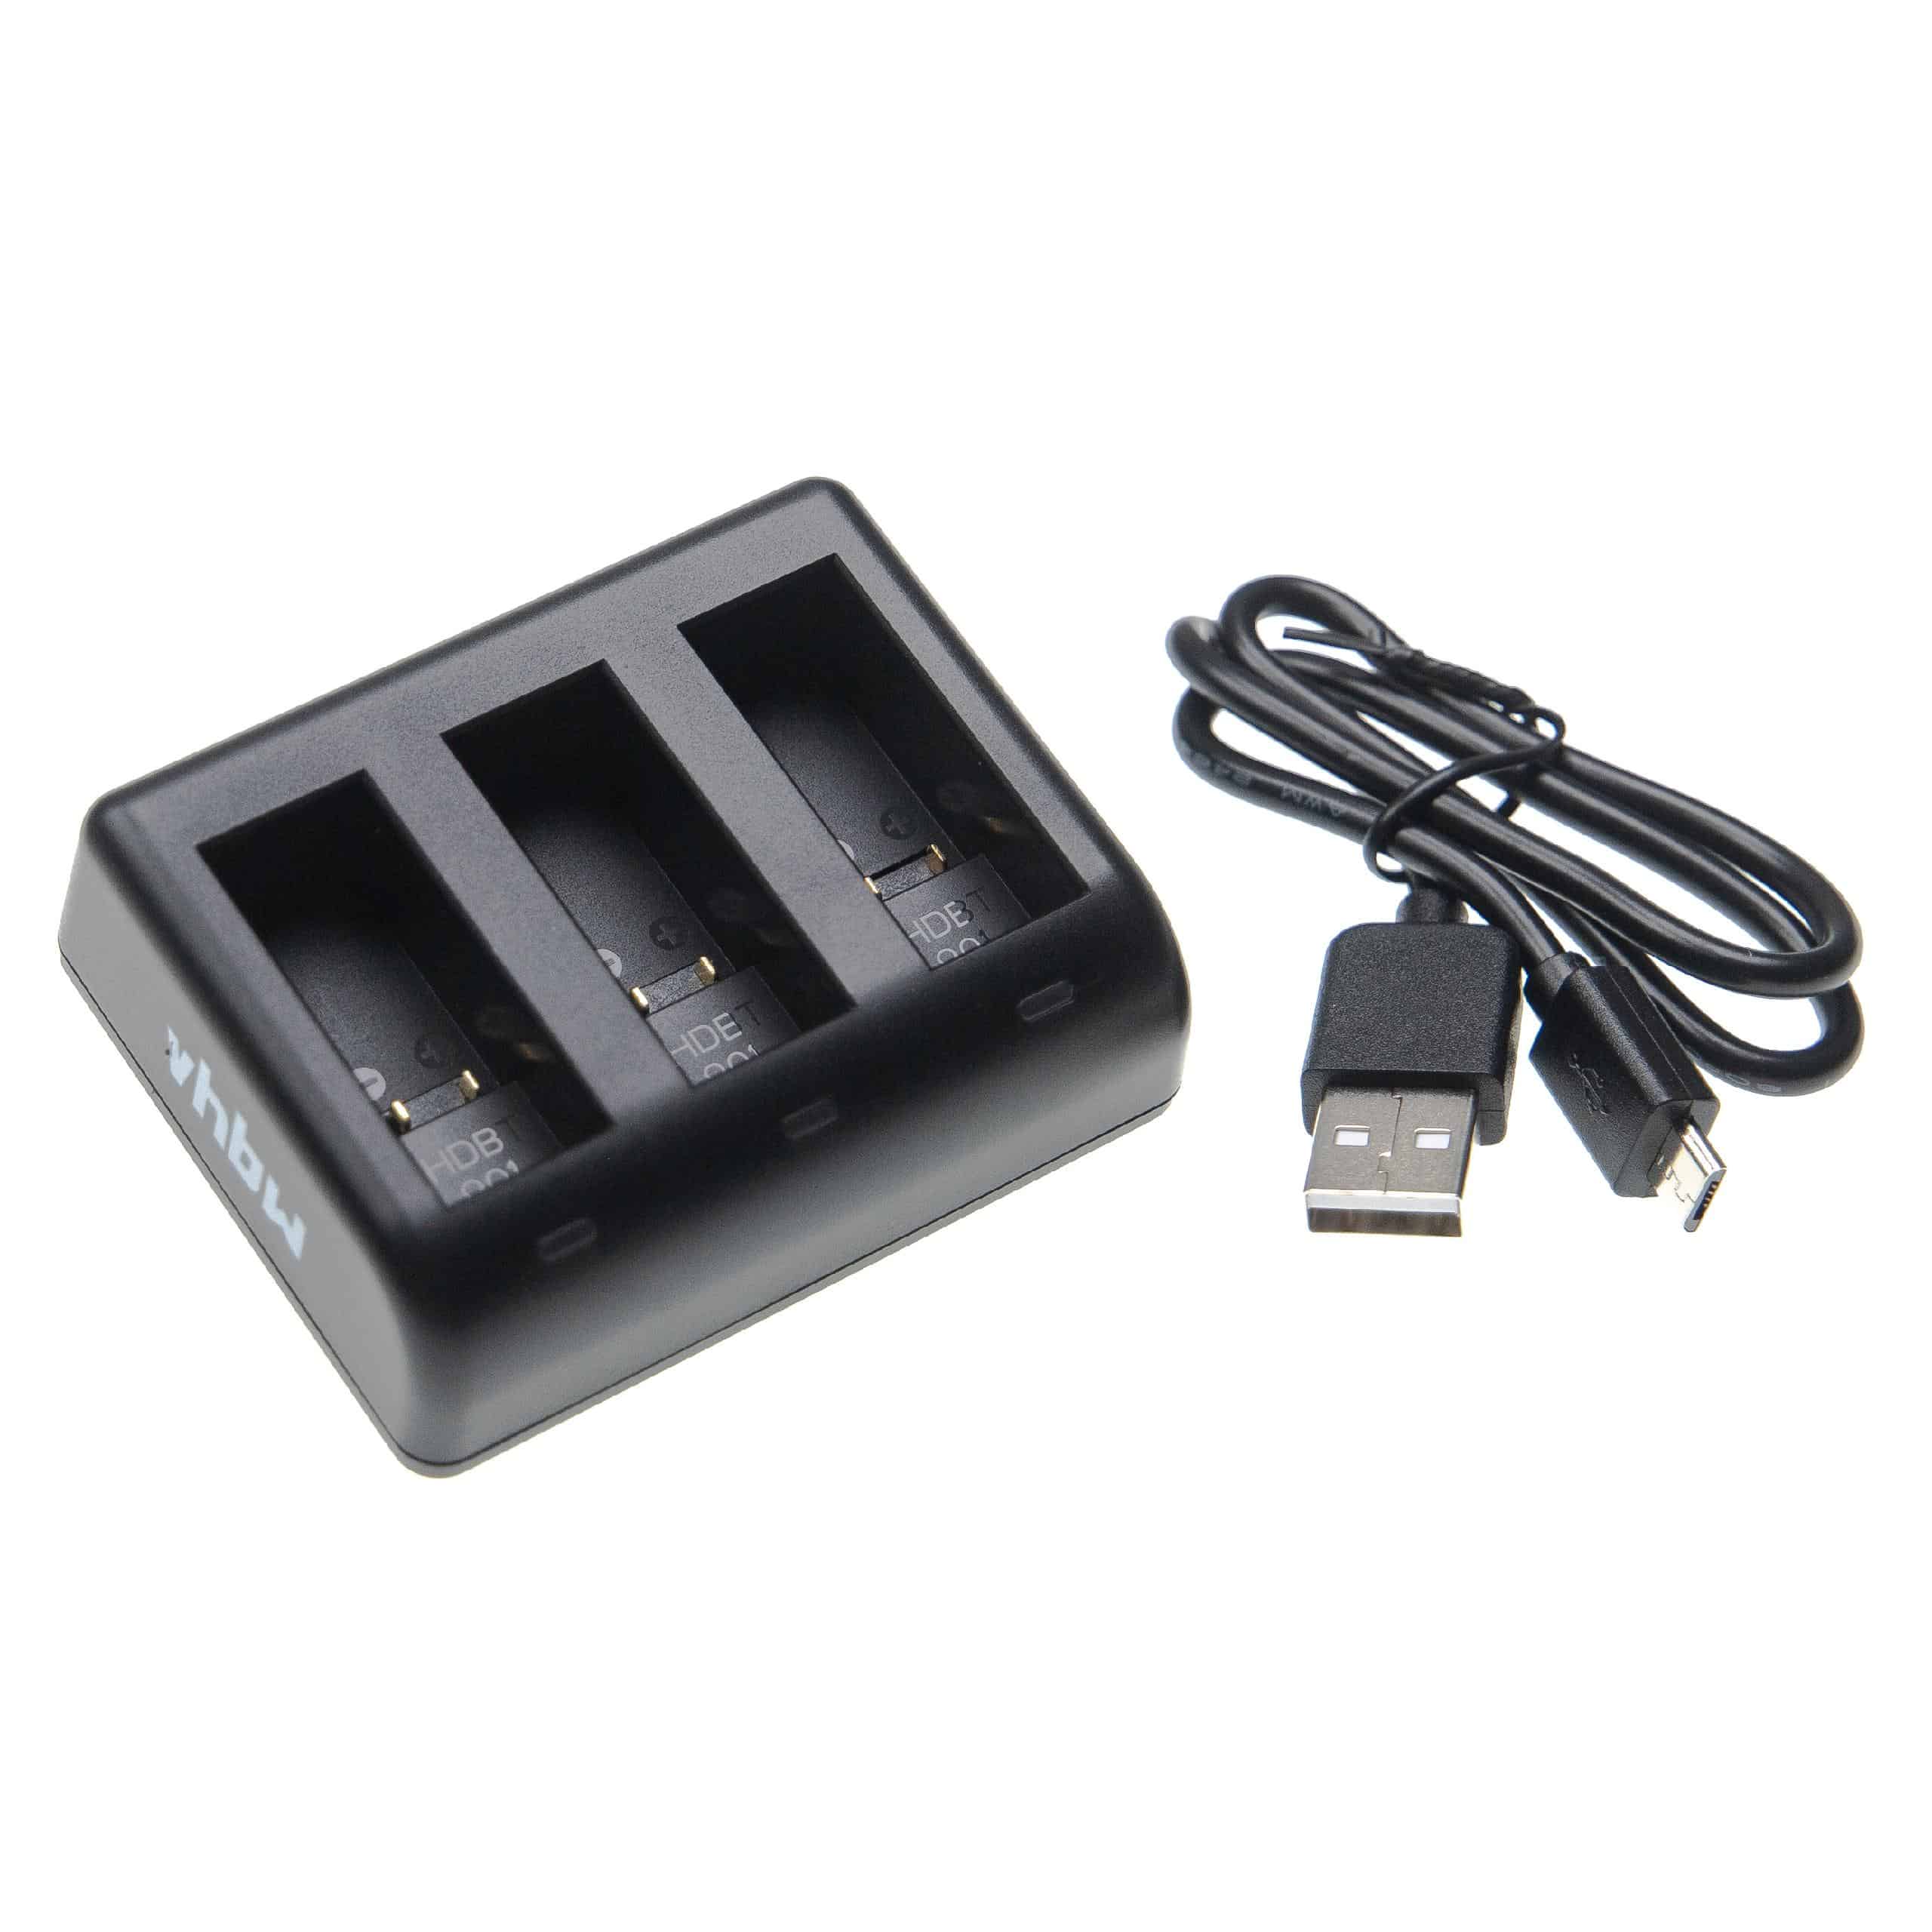 Battery Charger suitable for Hero 9 Camera etc. - 0.7 A, 4.4 V